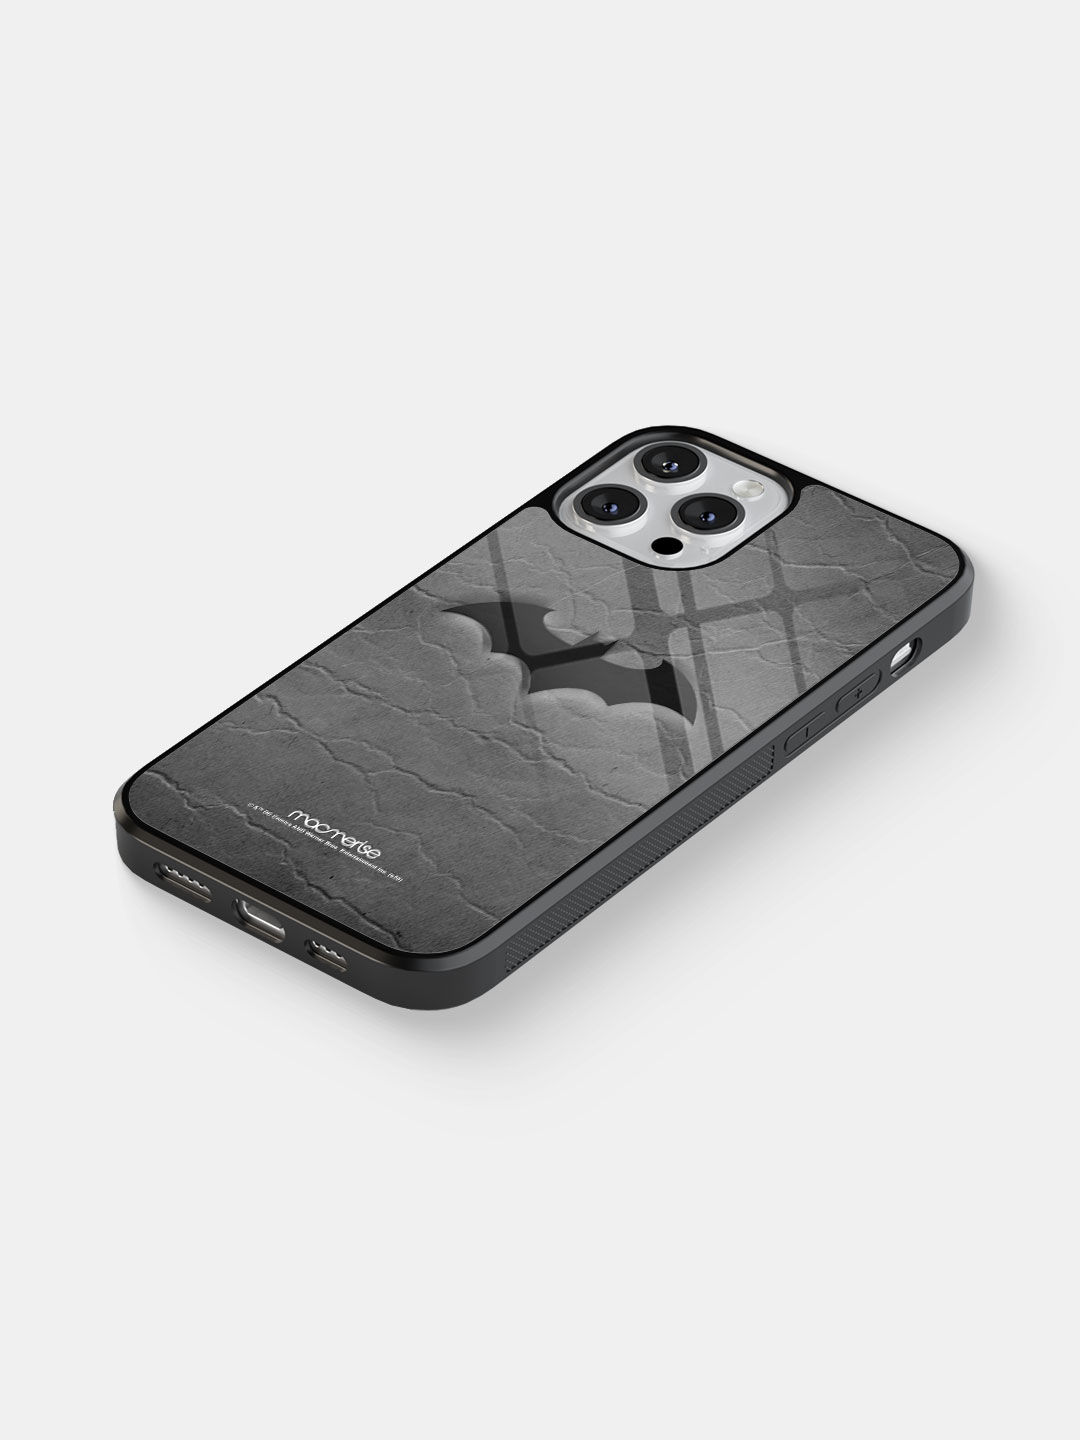 Fade Out Batman - Glass Case For iPhone 13 Pro Max